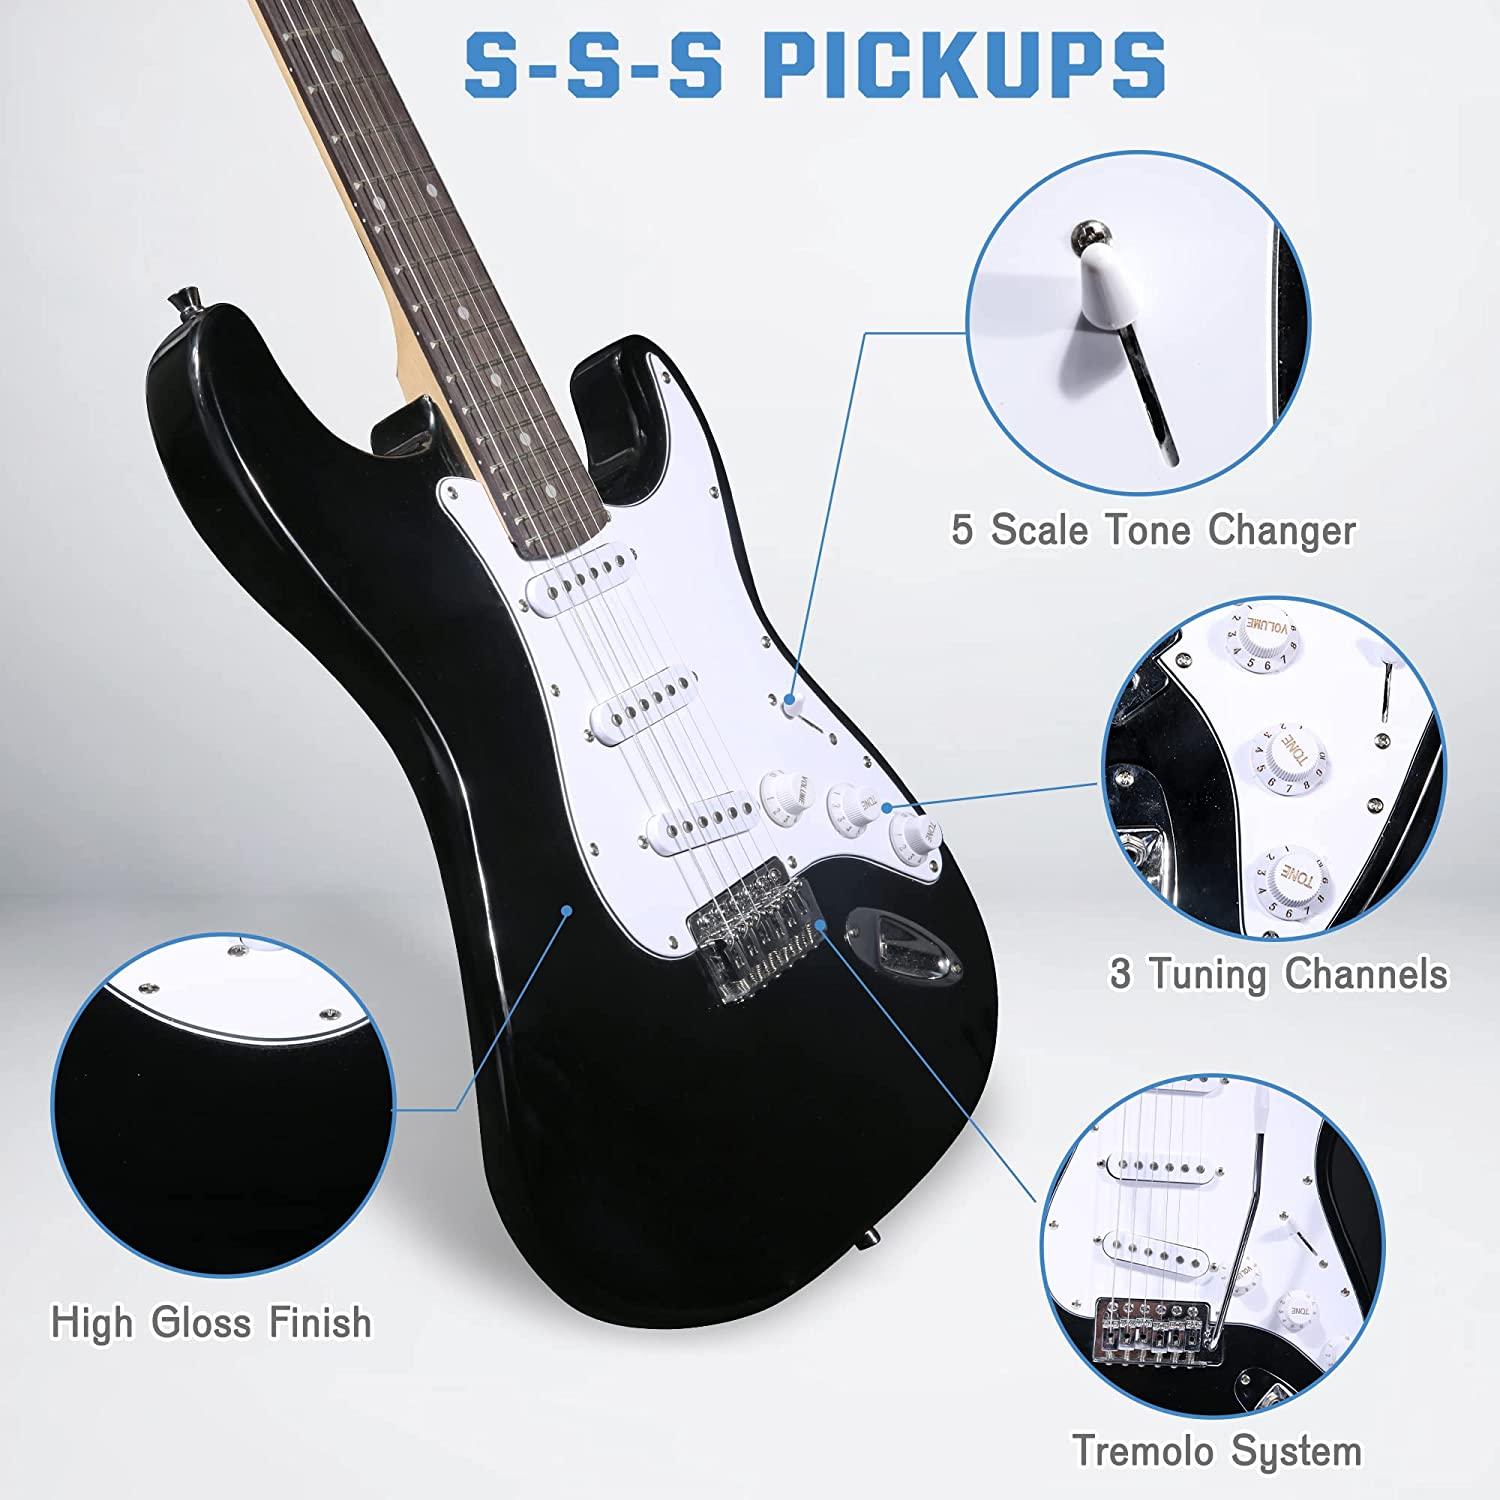 39 Inch Electric Guitar Starter Kit for Teenager and Adult, Full-size Beginner Guitar with 10 W Amplifier, Carrier Bag, Tuner, Strings, Picks, Cable - Bosonshop